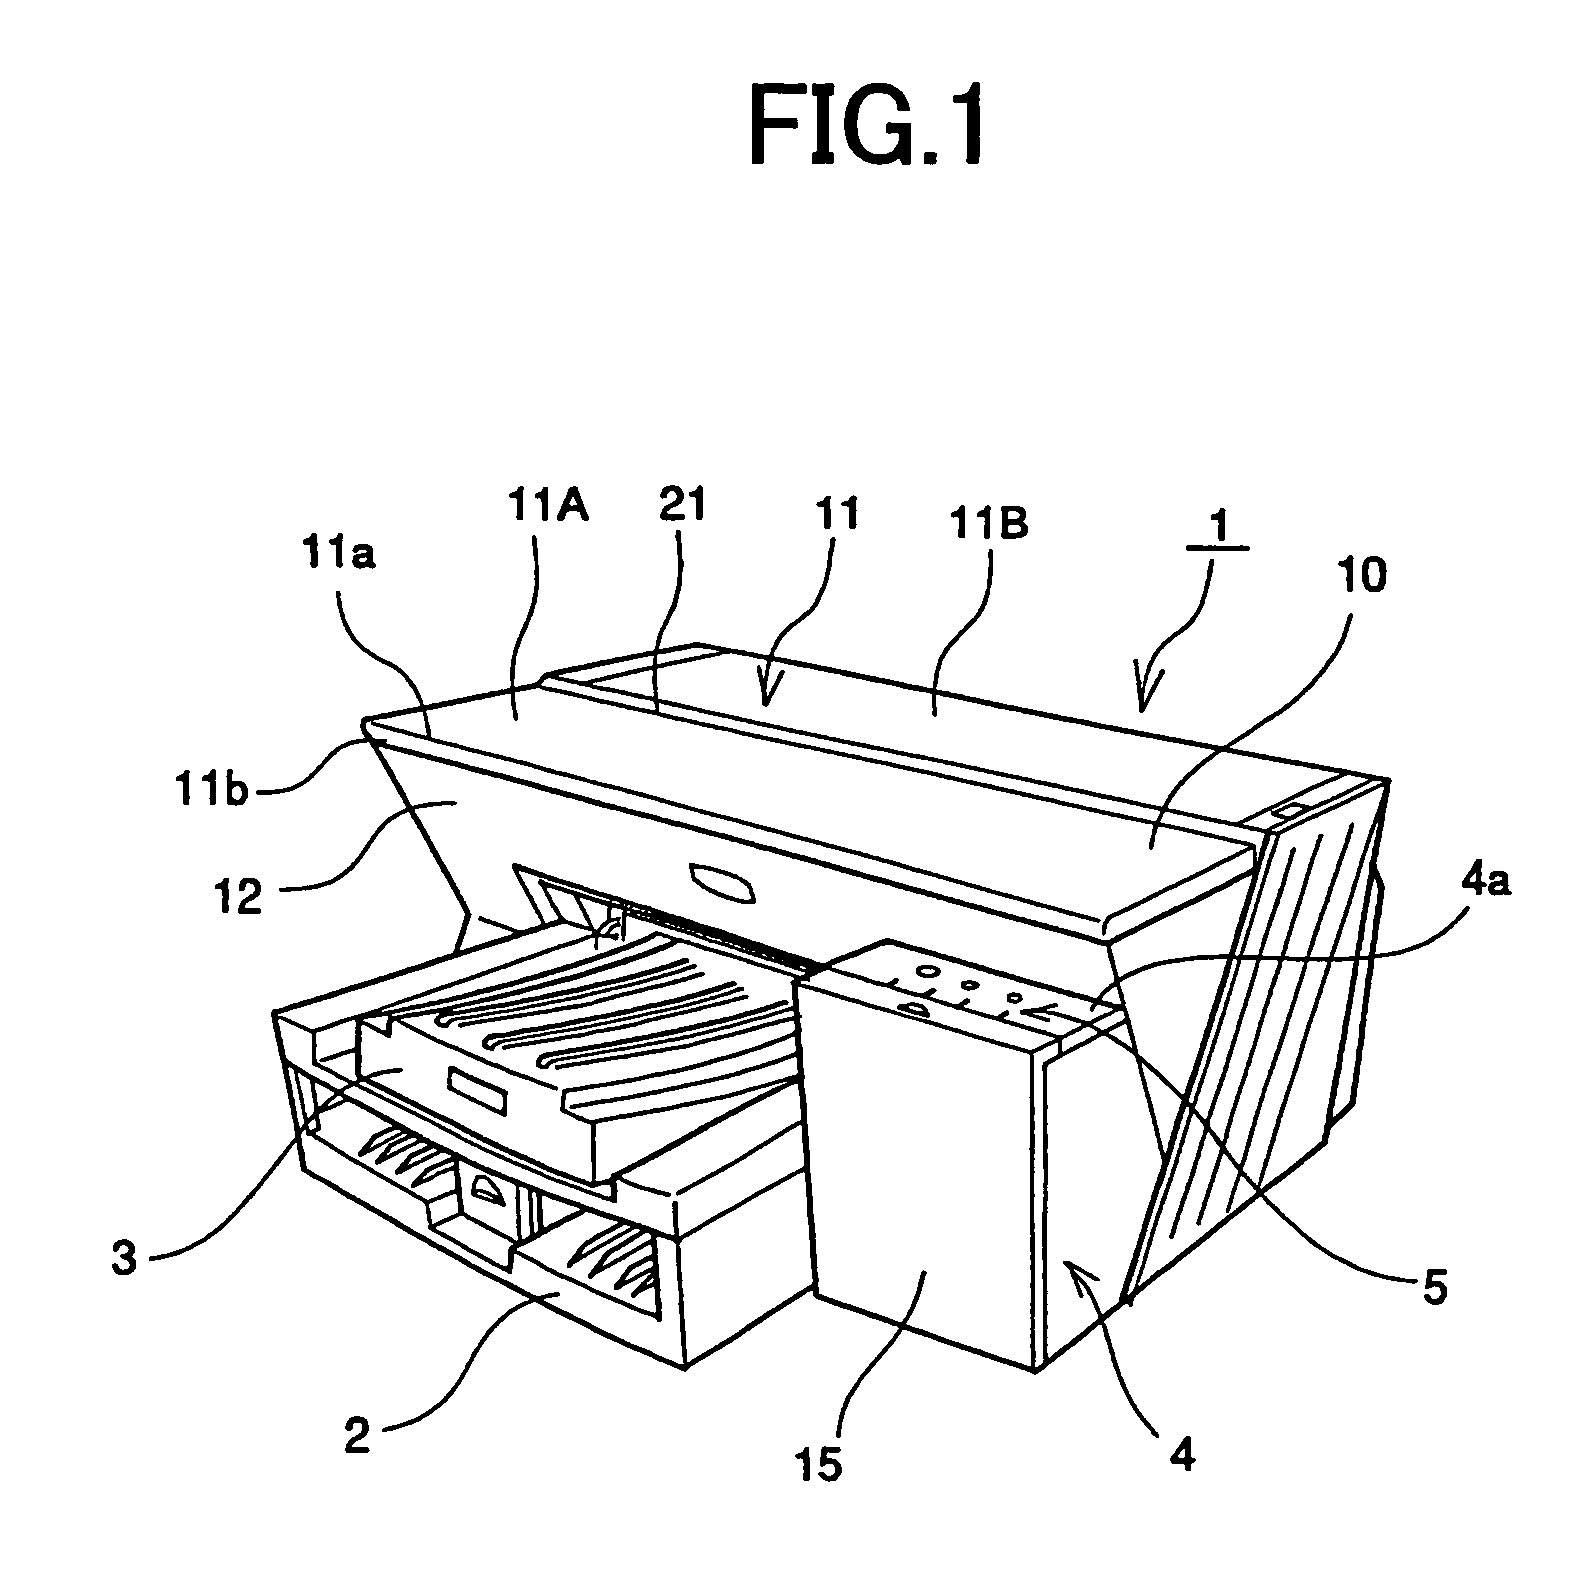 Compact front-operable image forming apparatus